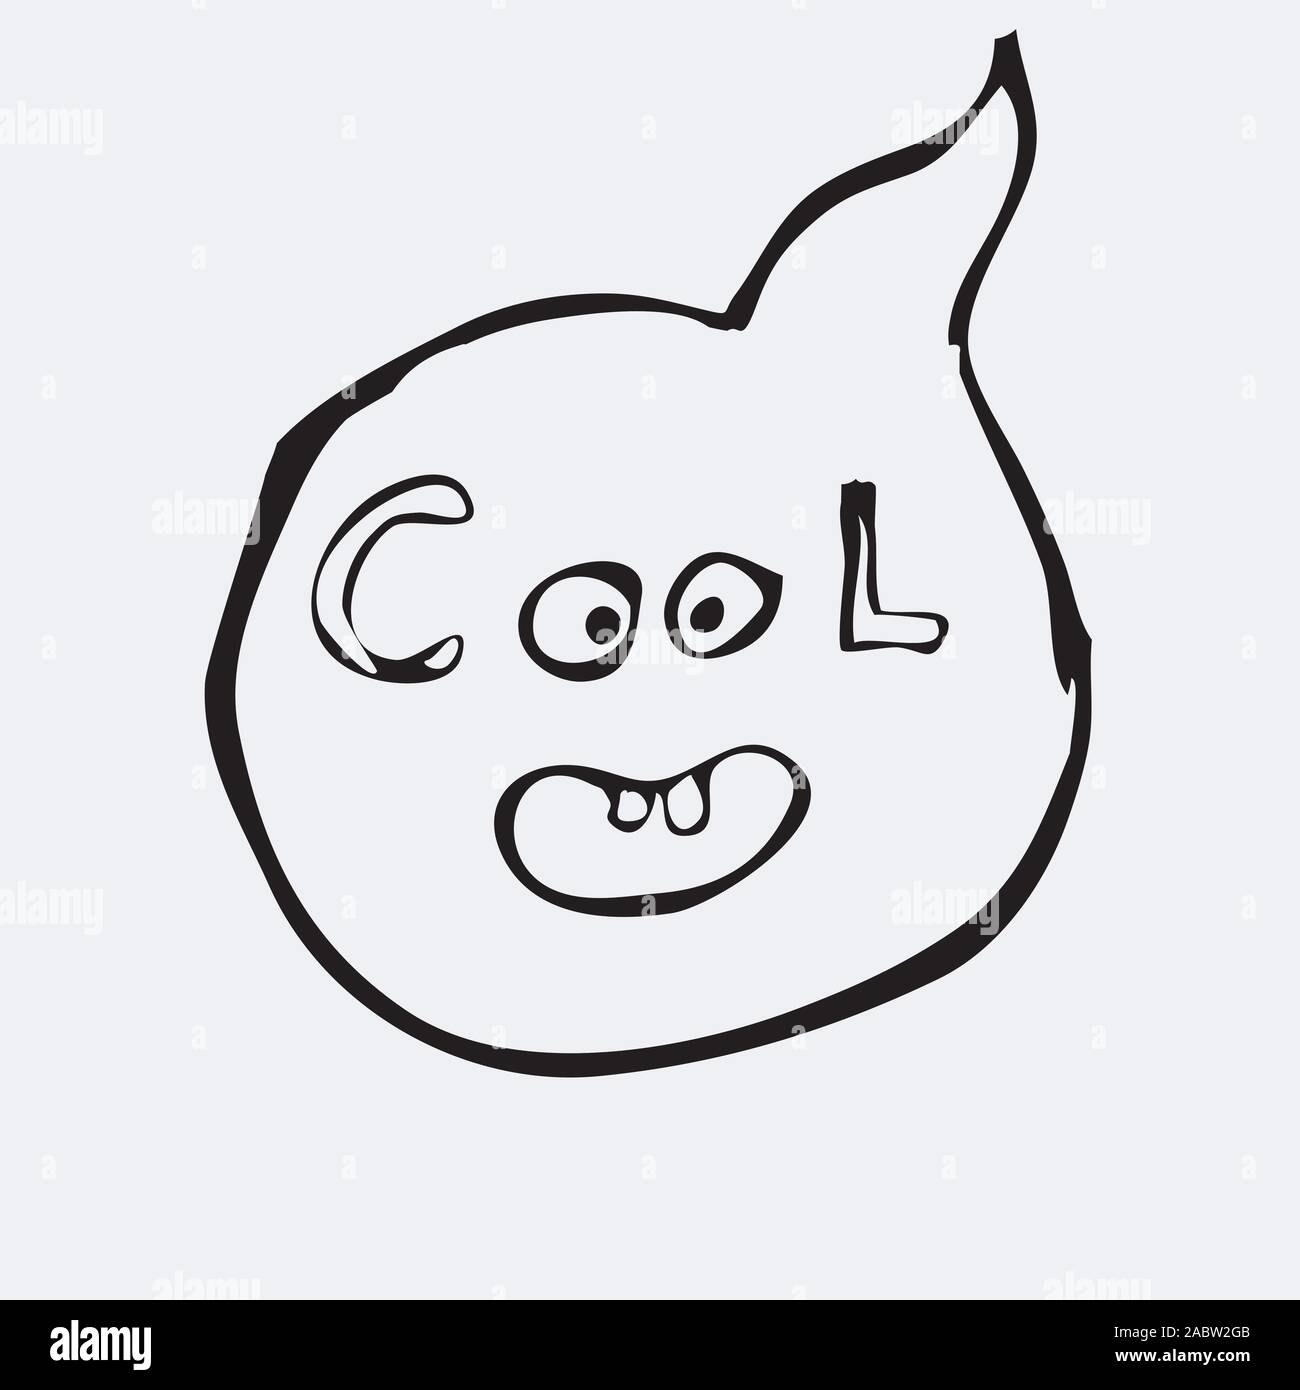 Ghost in the form of a dialog box that says cool. Stock Vector